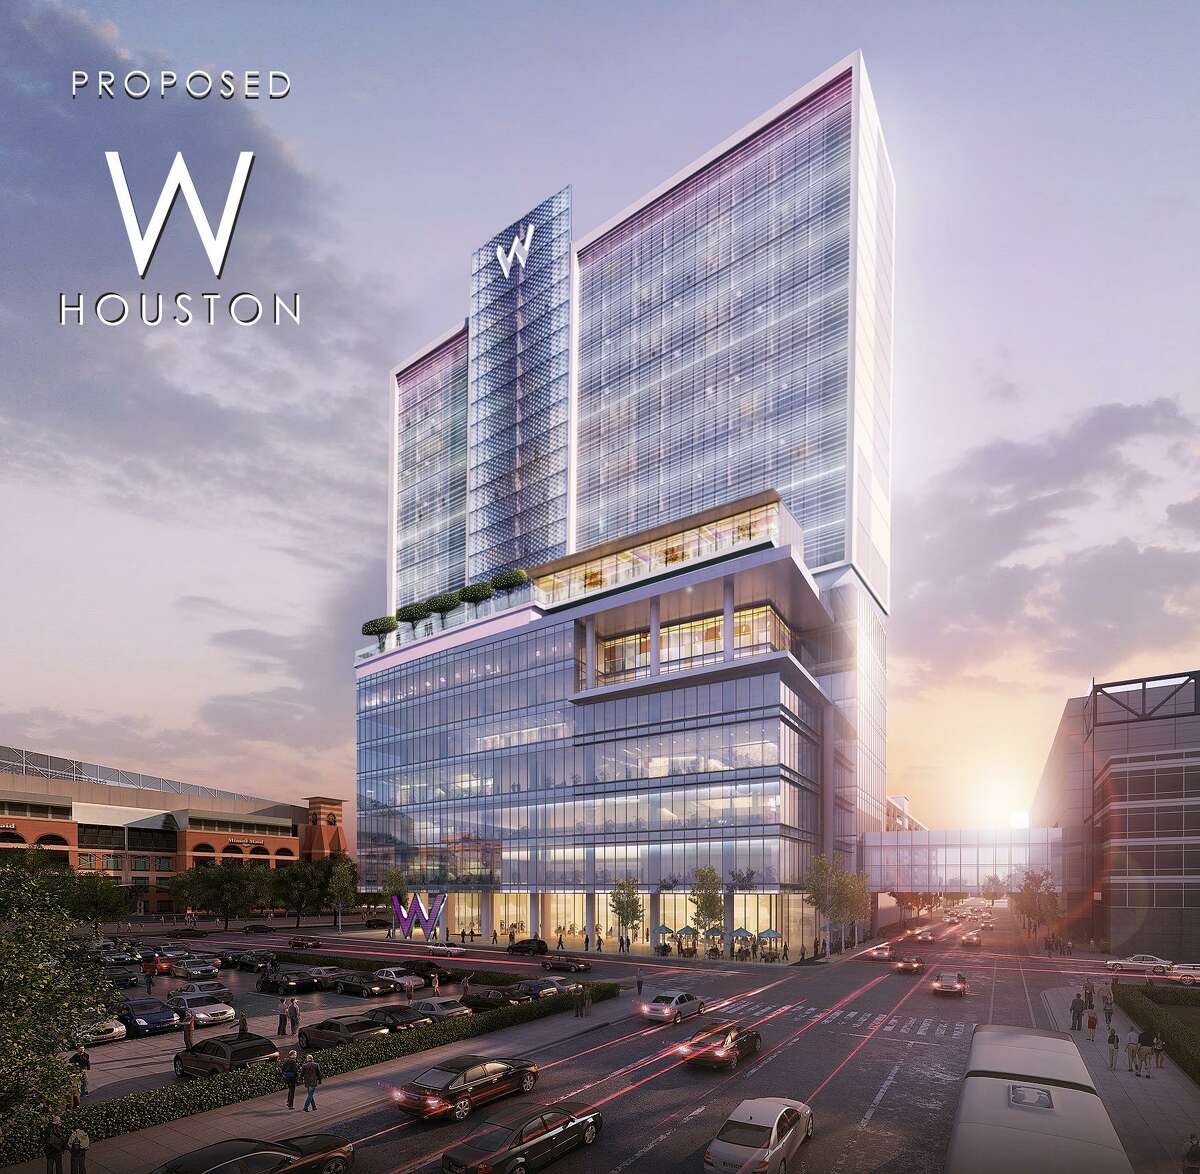 Rendering of W hotel proposed for downtown Houston